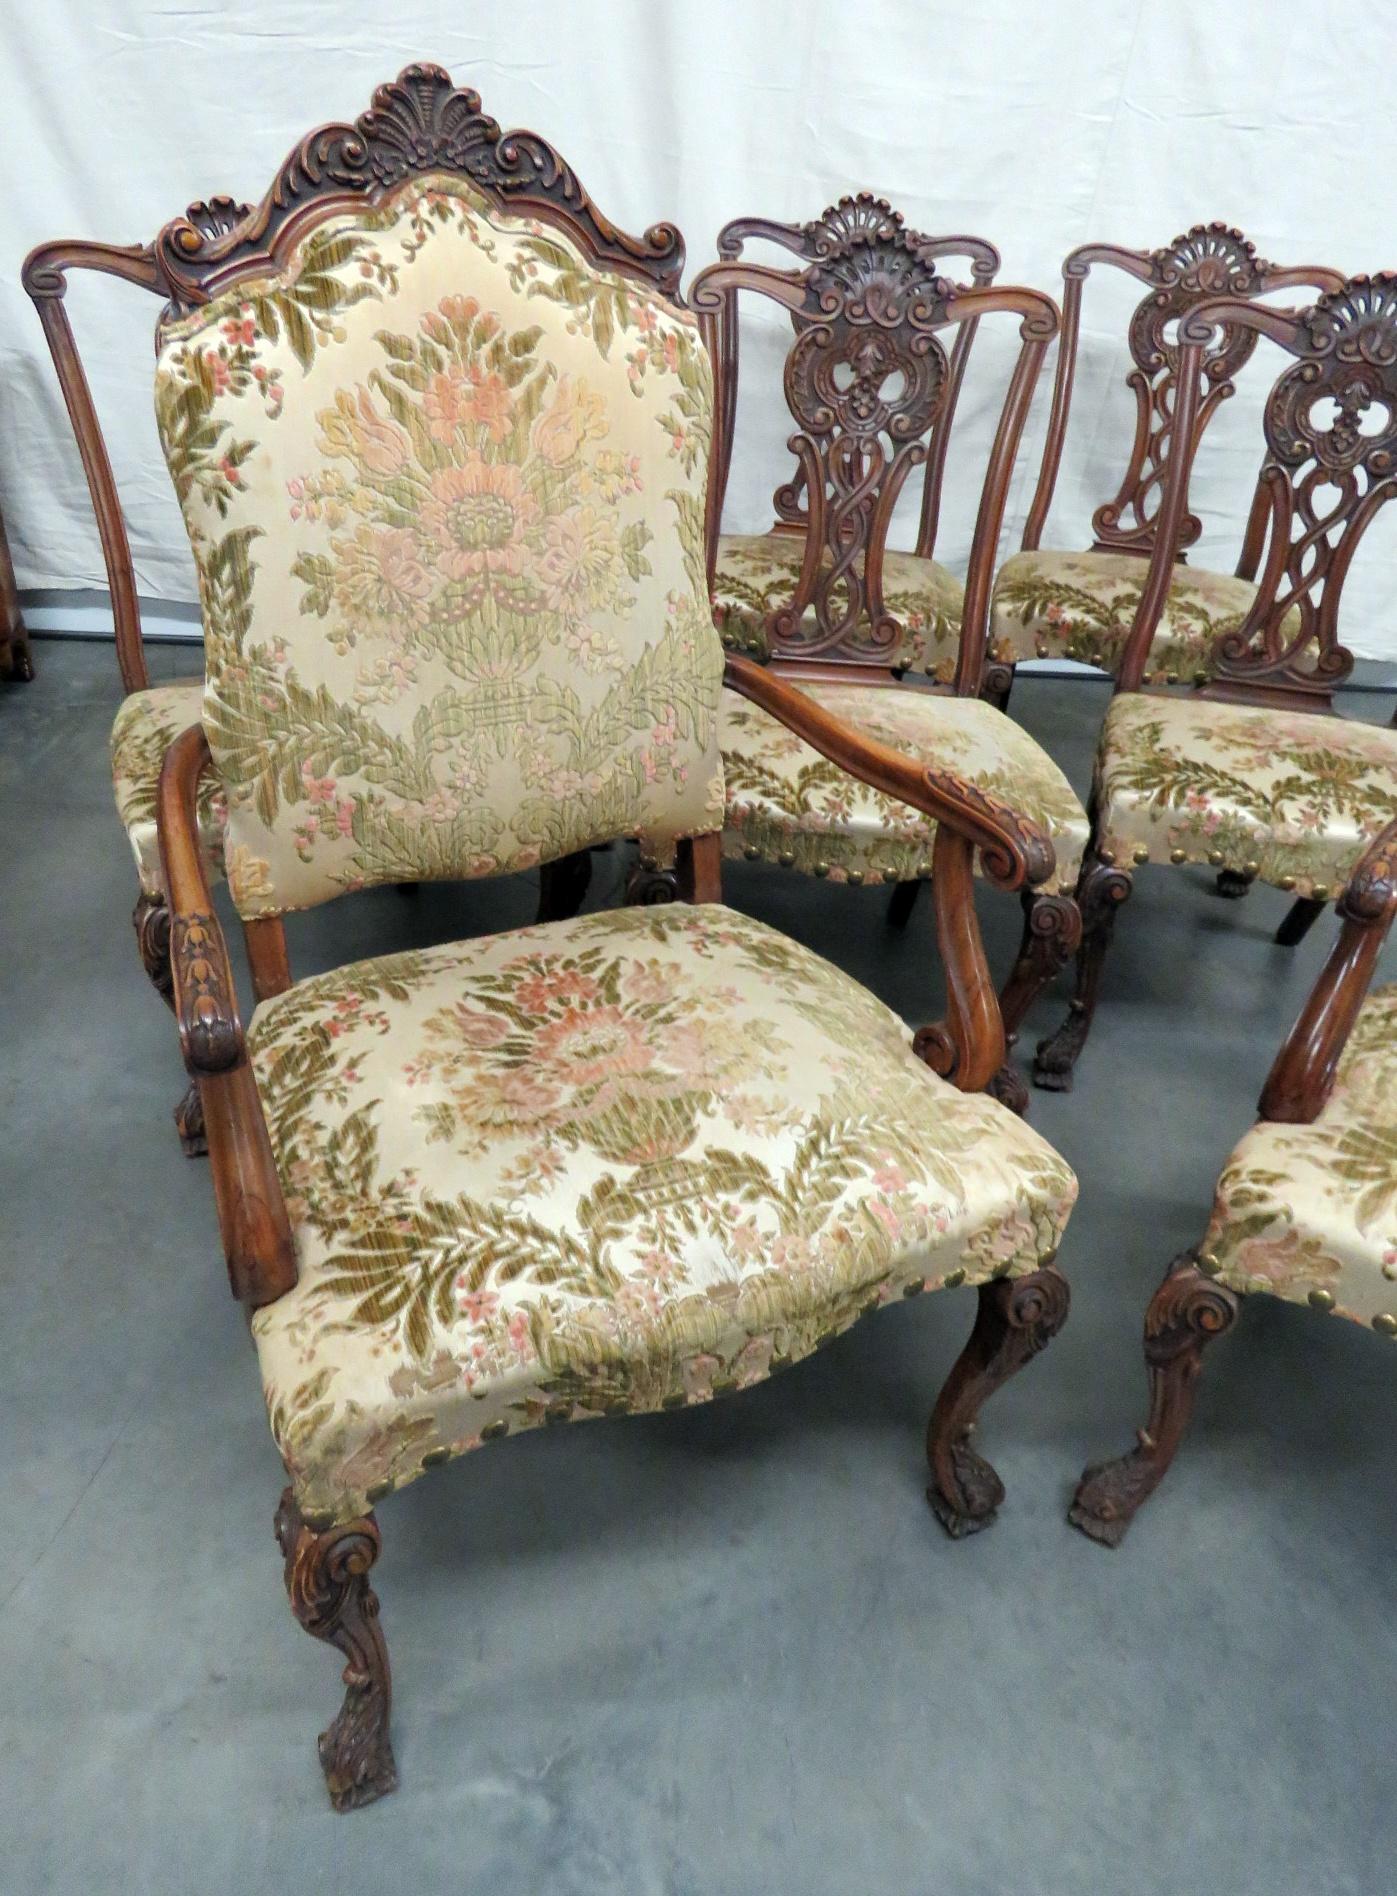 Set of 8 Chippendale style dining room chairs with textured upholstery. The arm chairs with upholstered backs measure 46.5